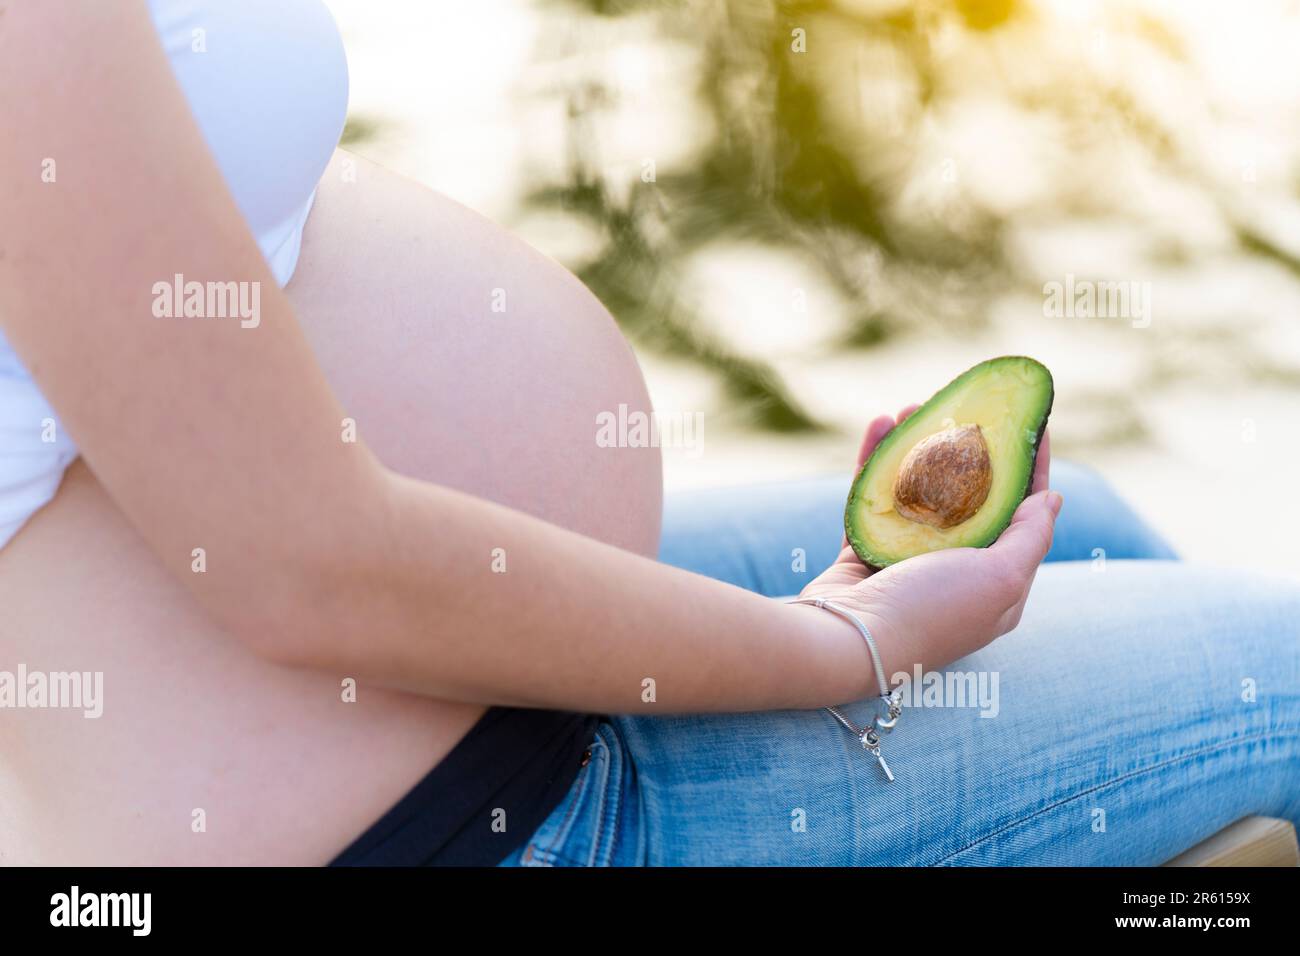 Pregnant woman holding an avocado and showing it to the camera Stock Photo